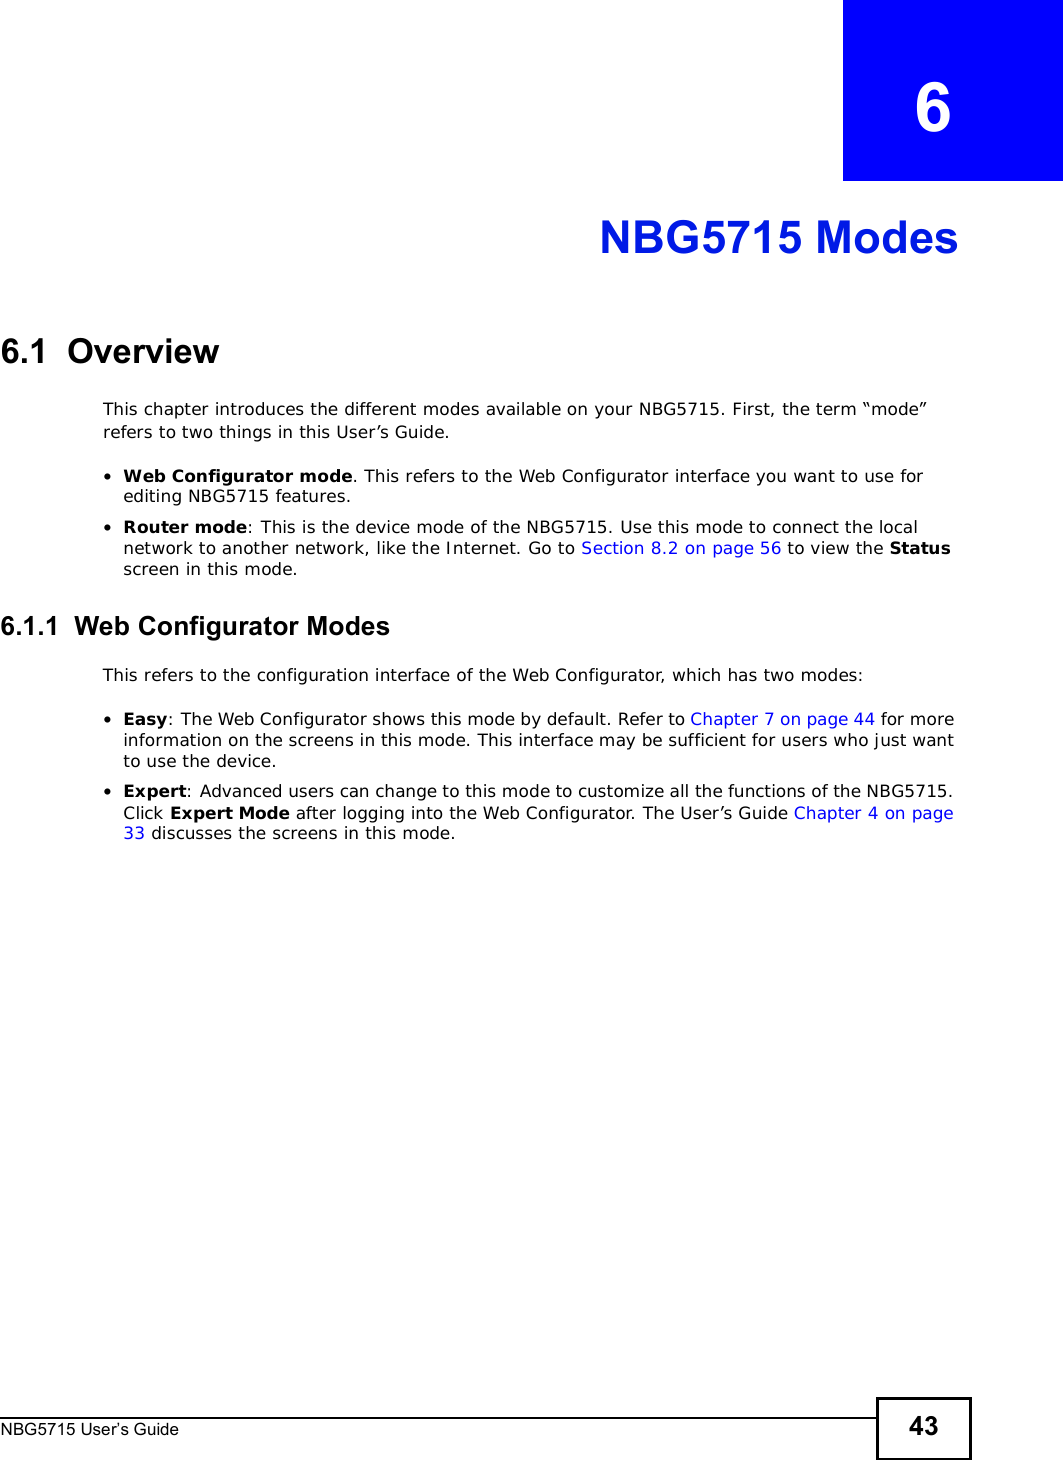 NBG5715 User’s Guide 43CHAPTER   6NBG5715 Modes6.1  OverviewThis chapter introduces the different modes available on your NBG5715. First, the term “mode” refers to two things in this User’s Guide.•Web Configurator mode. This refers to the Web Configurator interface you want to use for editing NBG5715 features. •Router mode: This is the device mode of the NBG5715. Use this mode to connect the local network to another network, like the Internet. Go to Section 8.2 on page 56 to view the Statusscreen in this mode.6.1.1  Web Configurator ModesThis refers to the configuration interface of the Web Configurator, which has two modes:•Easy:The Web Configurator shows thismode by default. Refer to Chapter 7 on page 44 for more information on the screens in this mode. This interface may be sufficient for users who just want to use the device.•Expert: Advanced users can change to this mode to customize all the functions of the NBG5715. Click Expert Mode after logging into the Web Configurator. The User’s Guide Chapter 4 on page 33 discusses the screens in this mode.